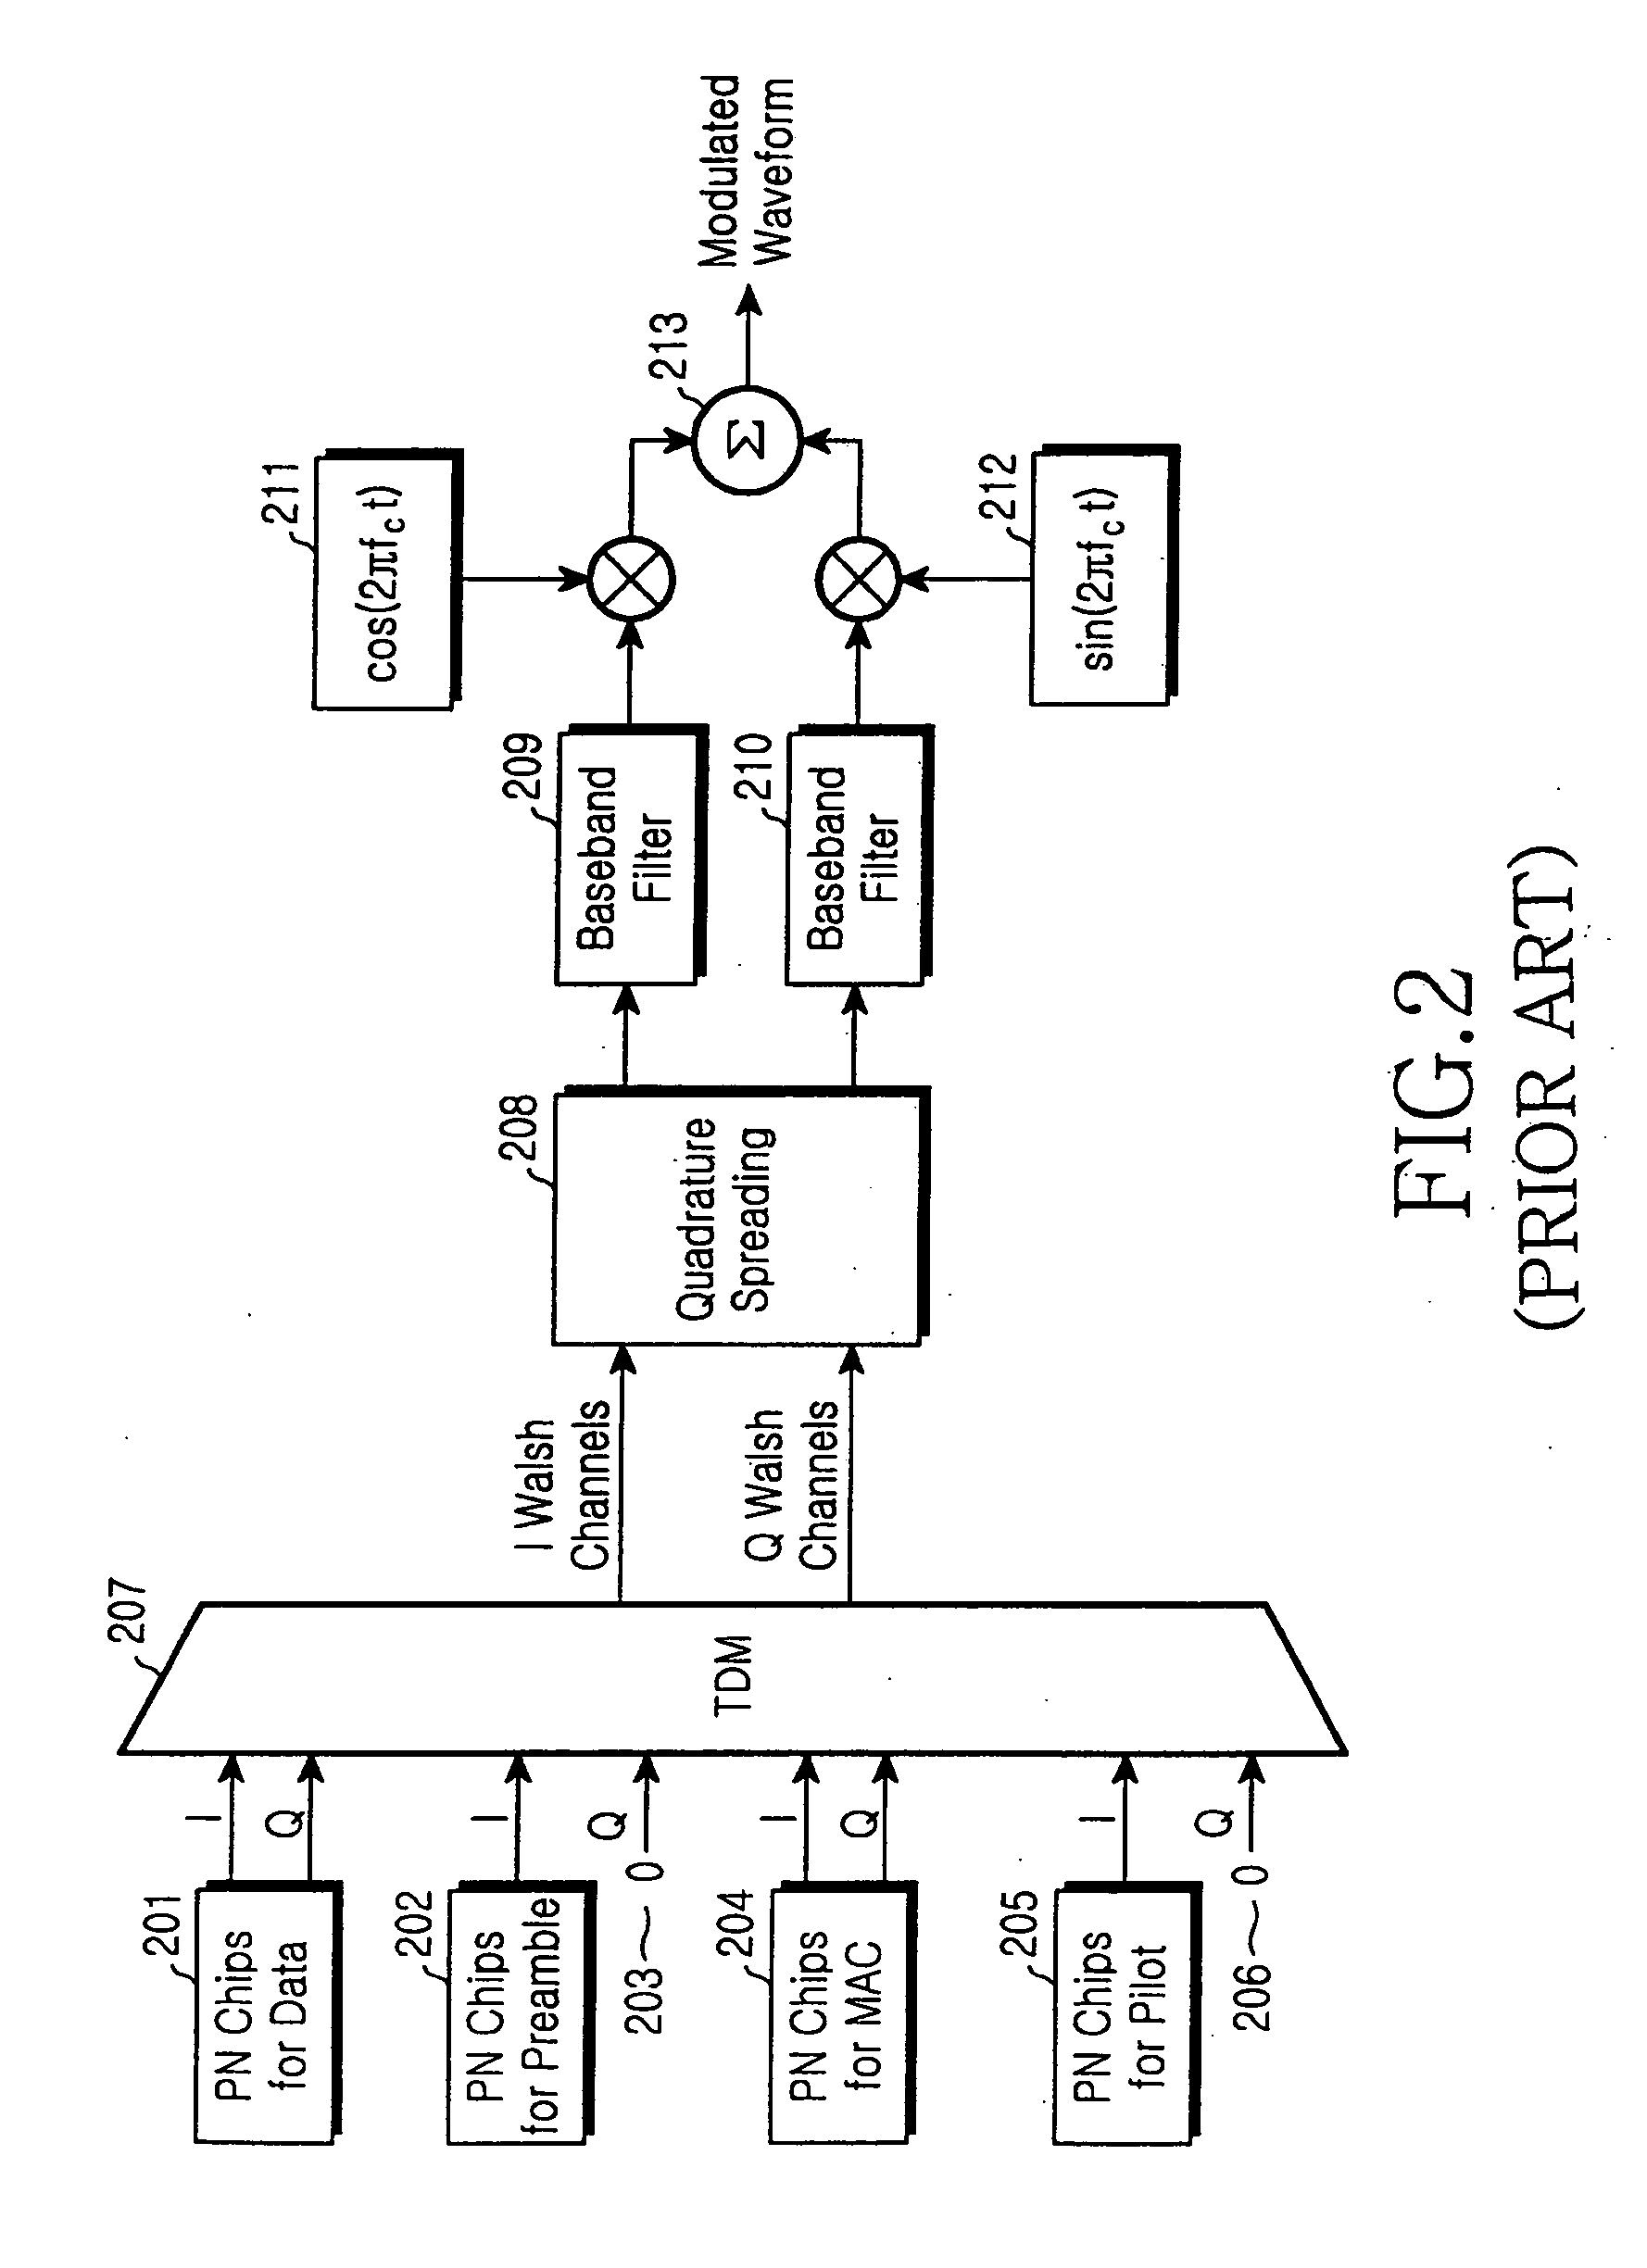 Apparatus and method for providing a broadcasting service in a mobile communication system